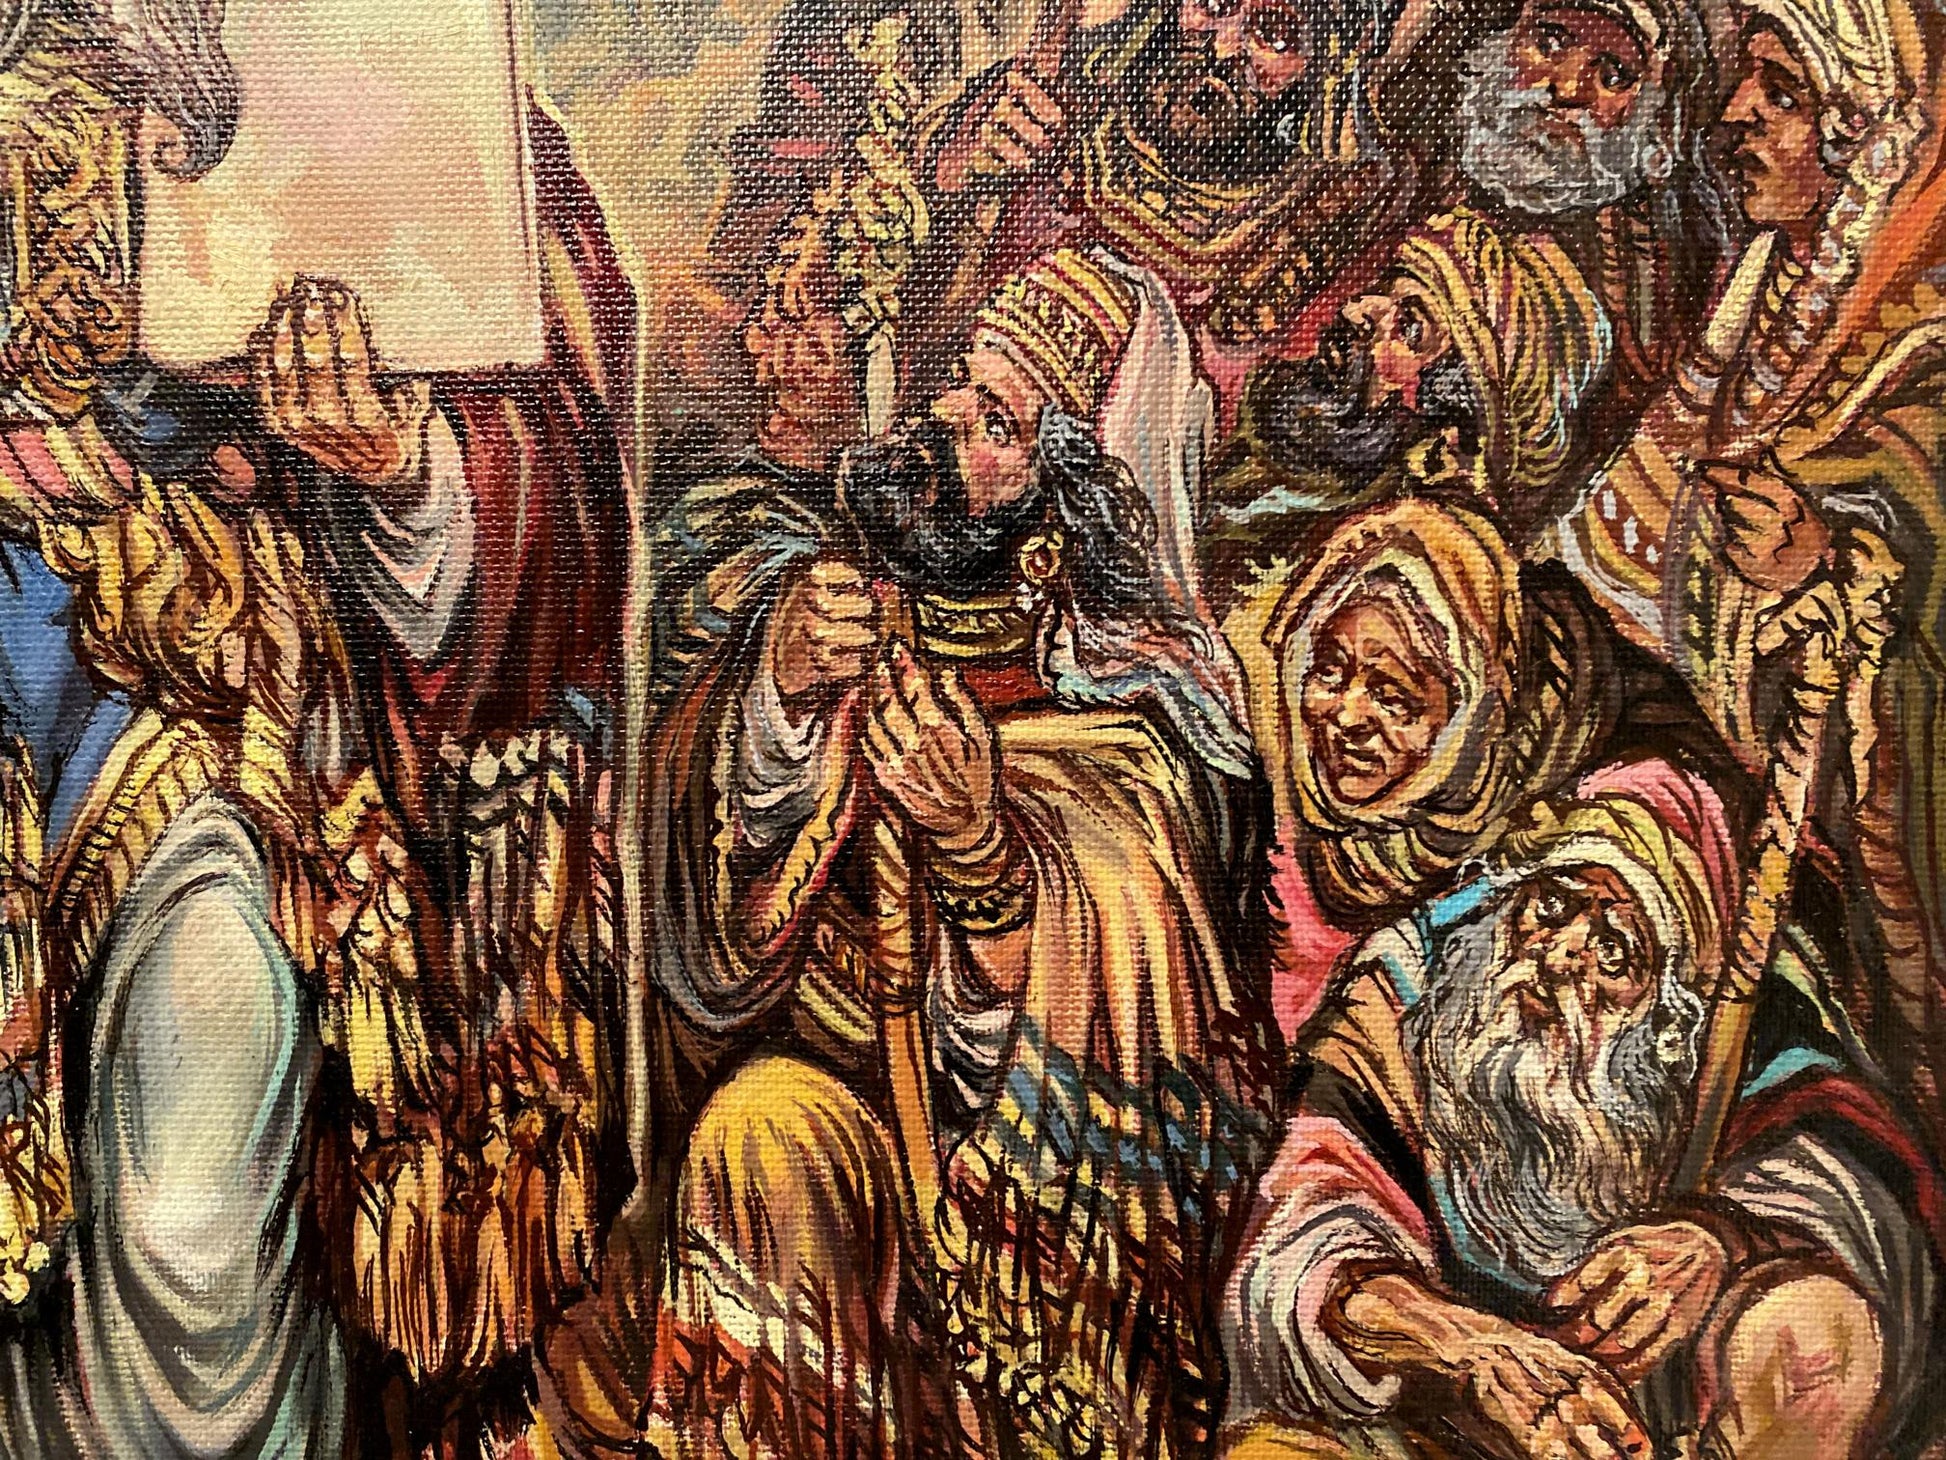 Litvinov's oil painting portrays the biblical figure of Moses